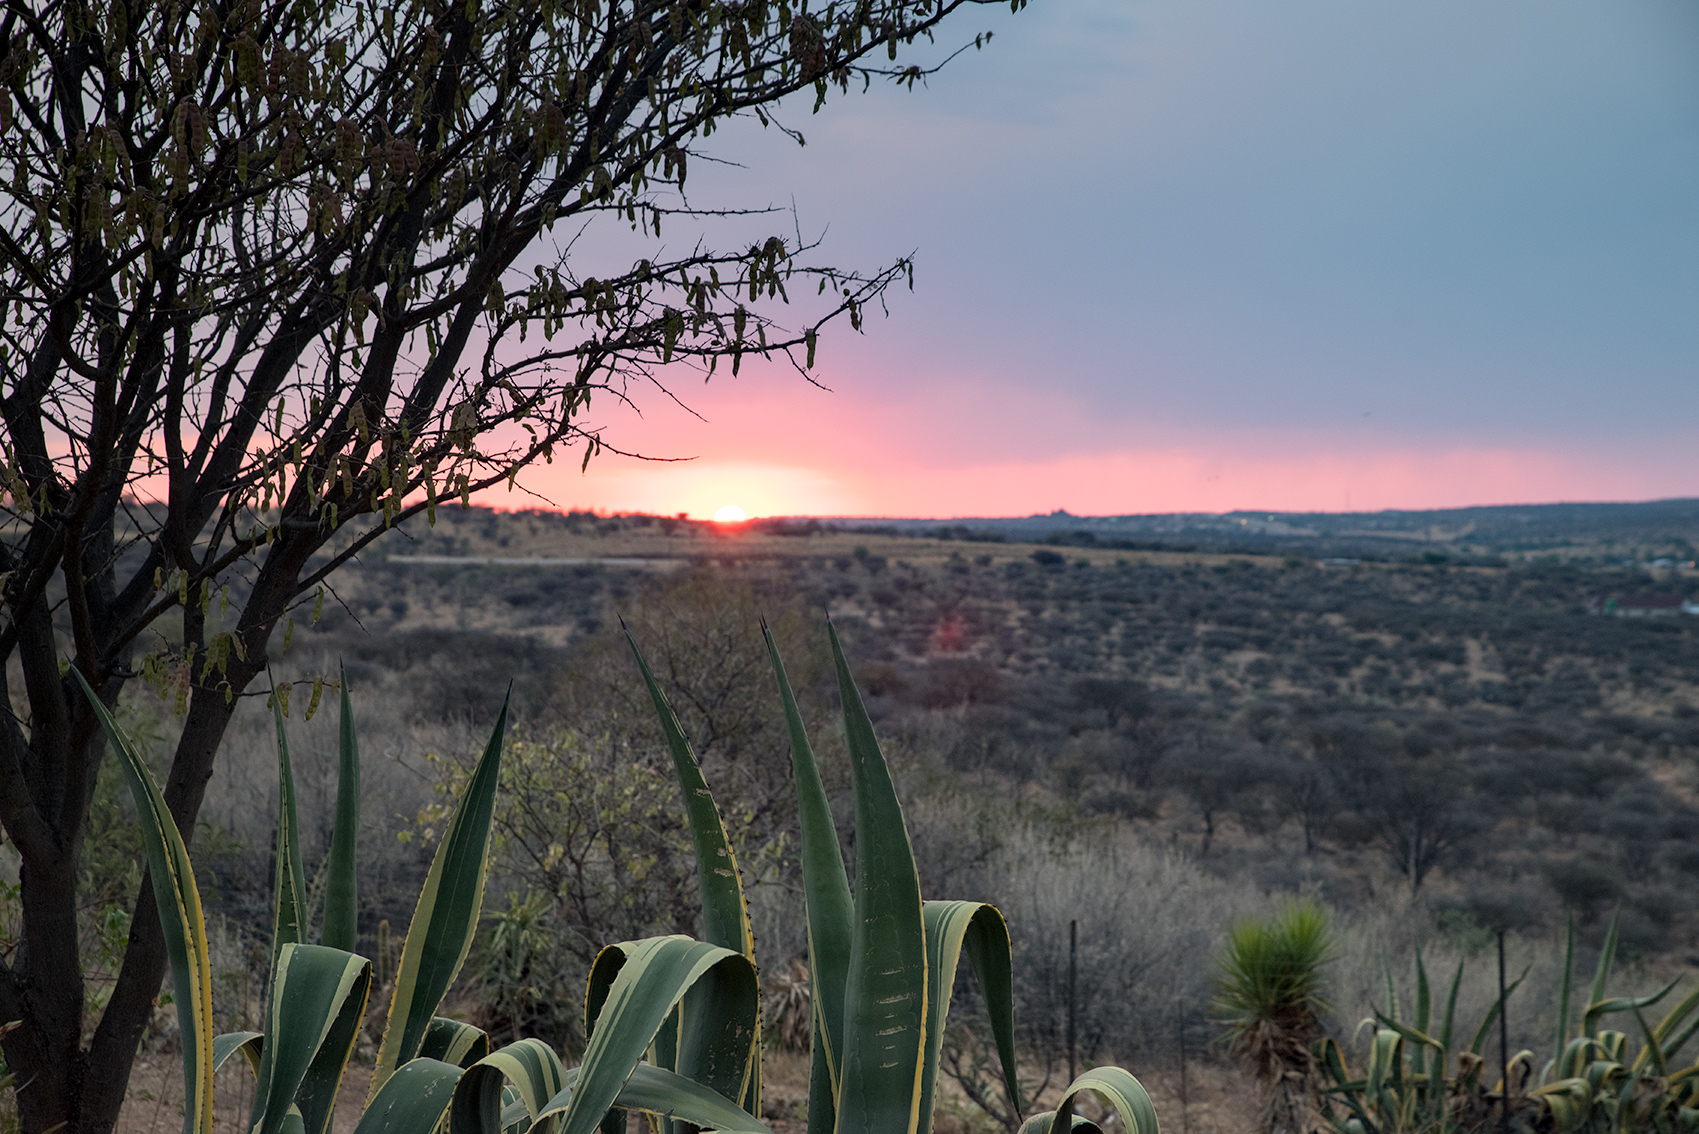 The view from the terrace of the Trans Kalahari Inn at sunset